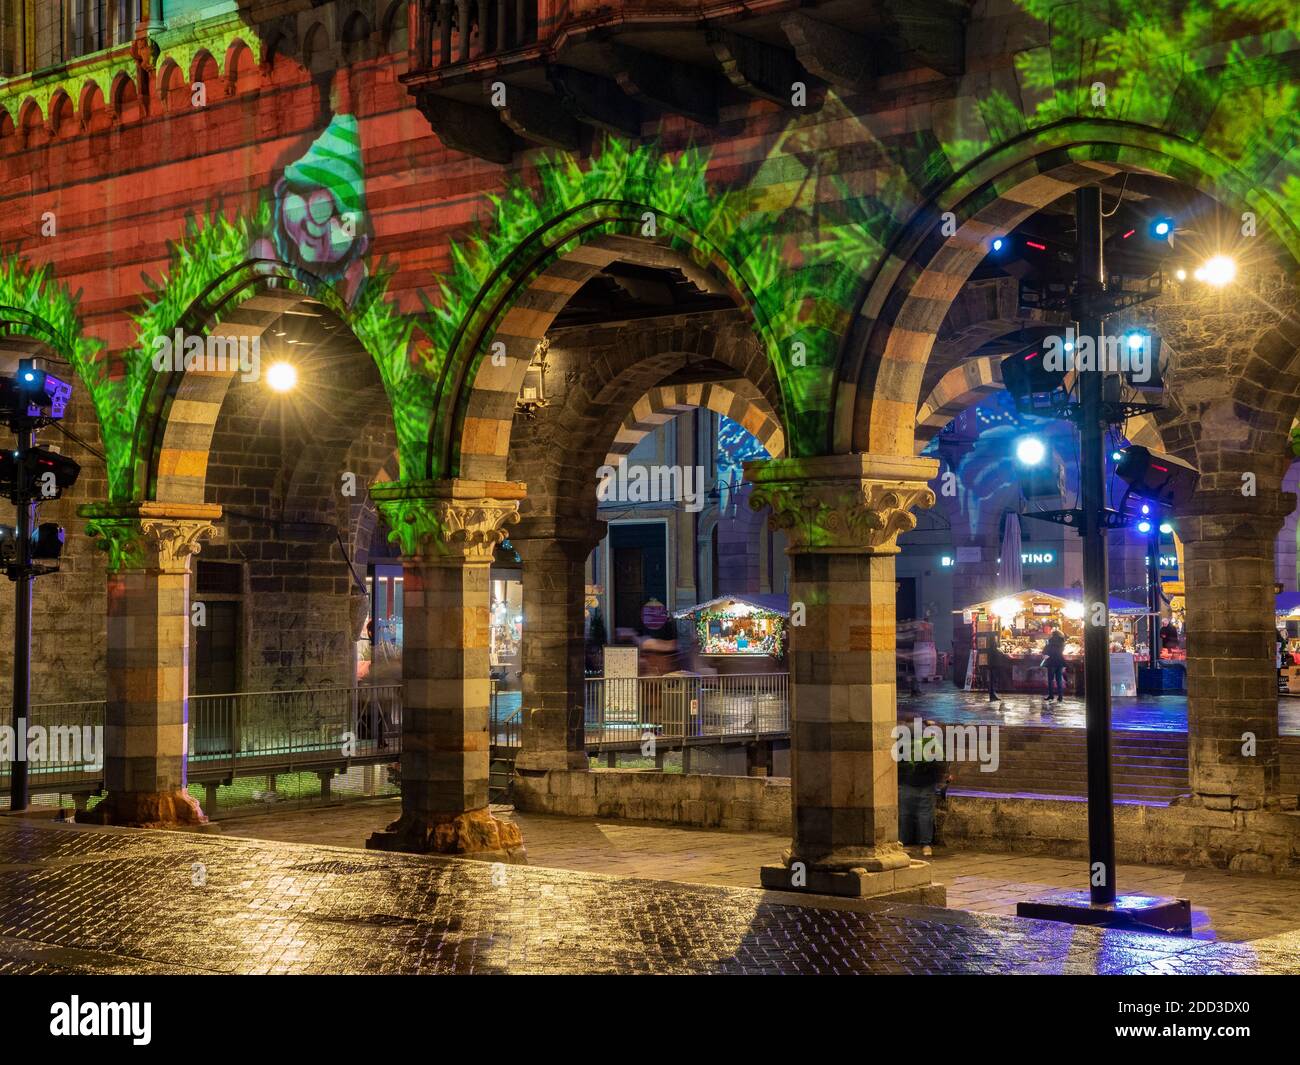 Xmas time, the city center illuminated and decorated for the Christmas holidays.Como,Lombardy,Italy Stock Photo